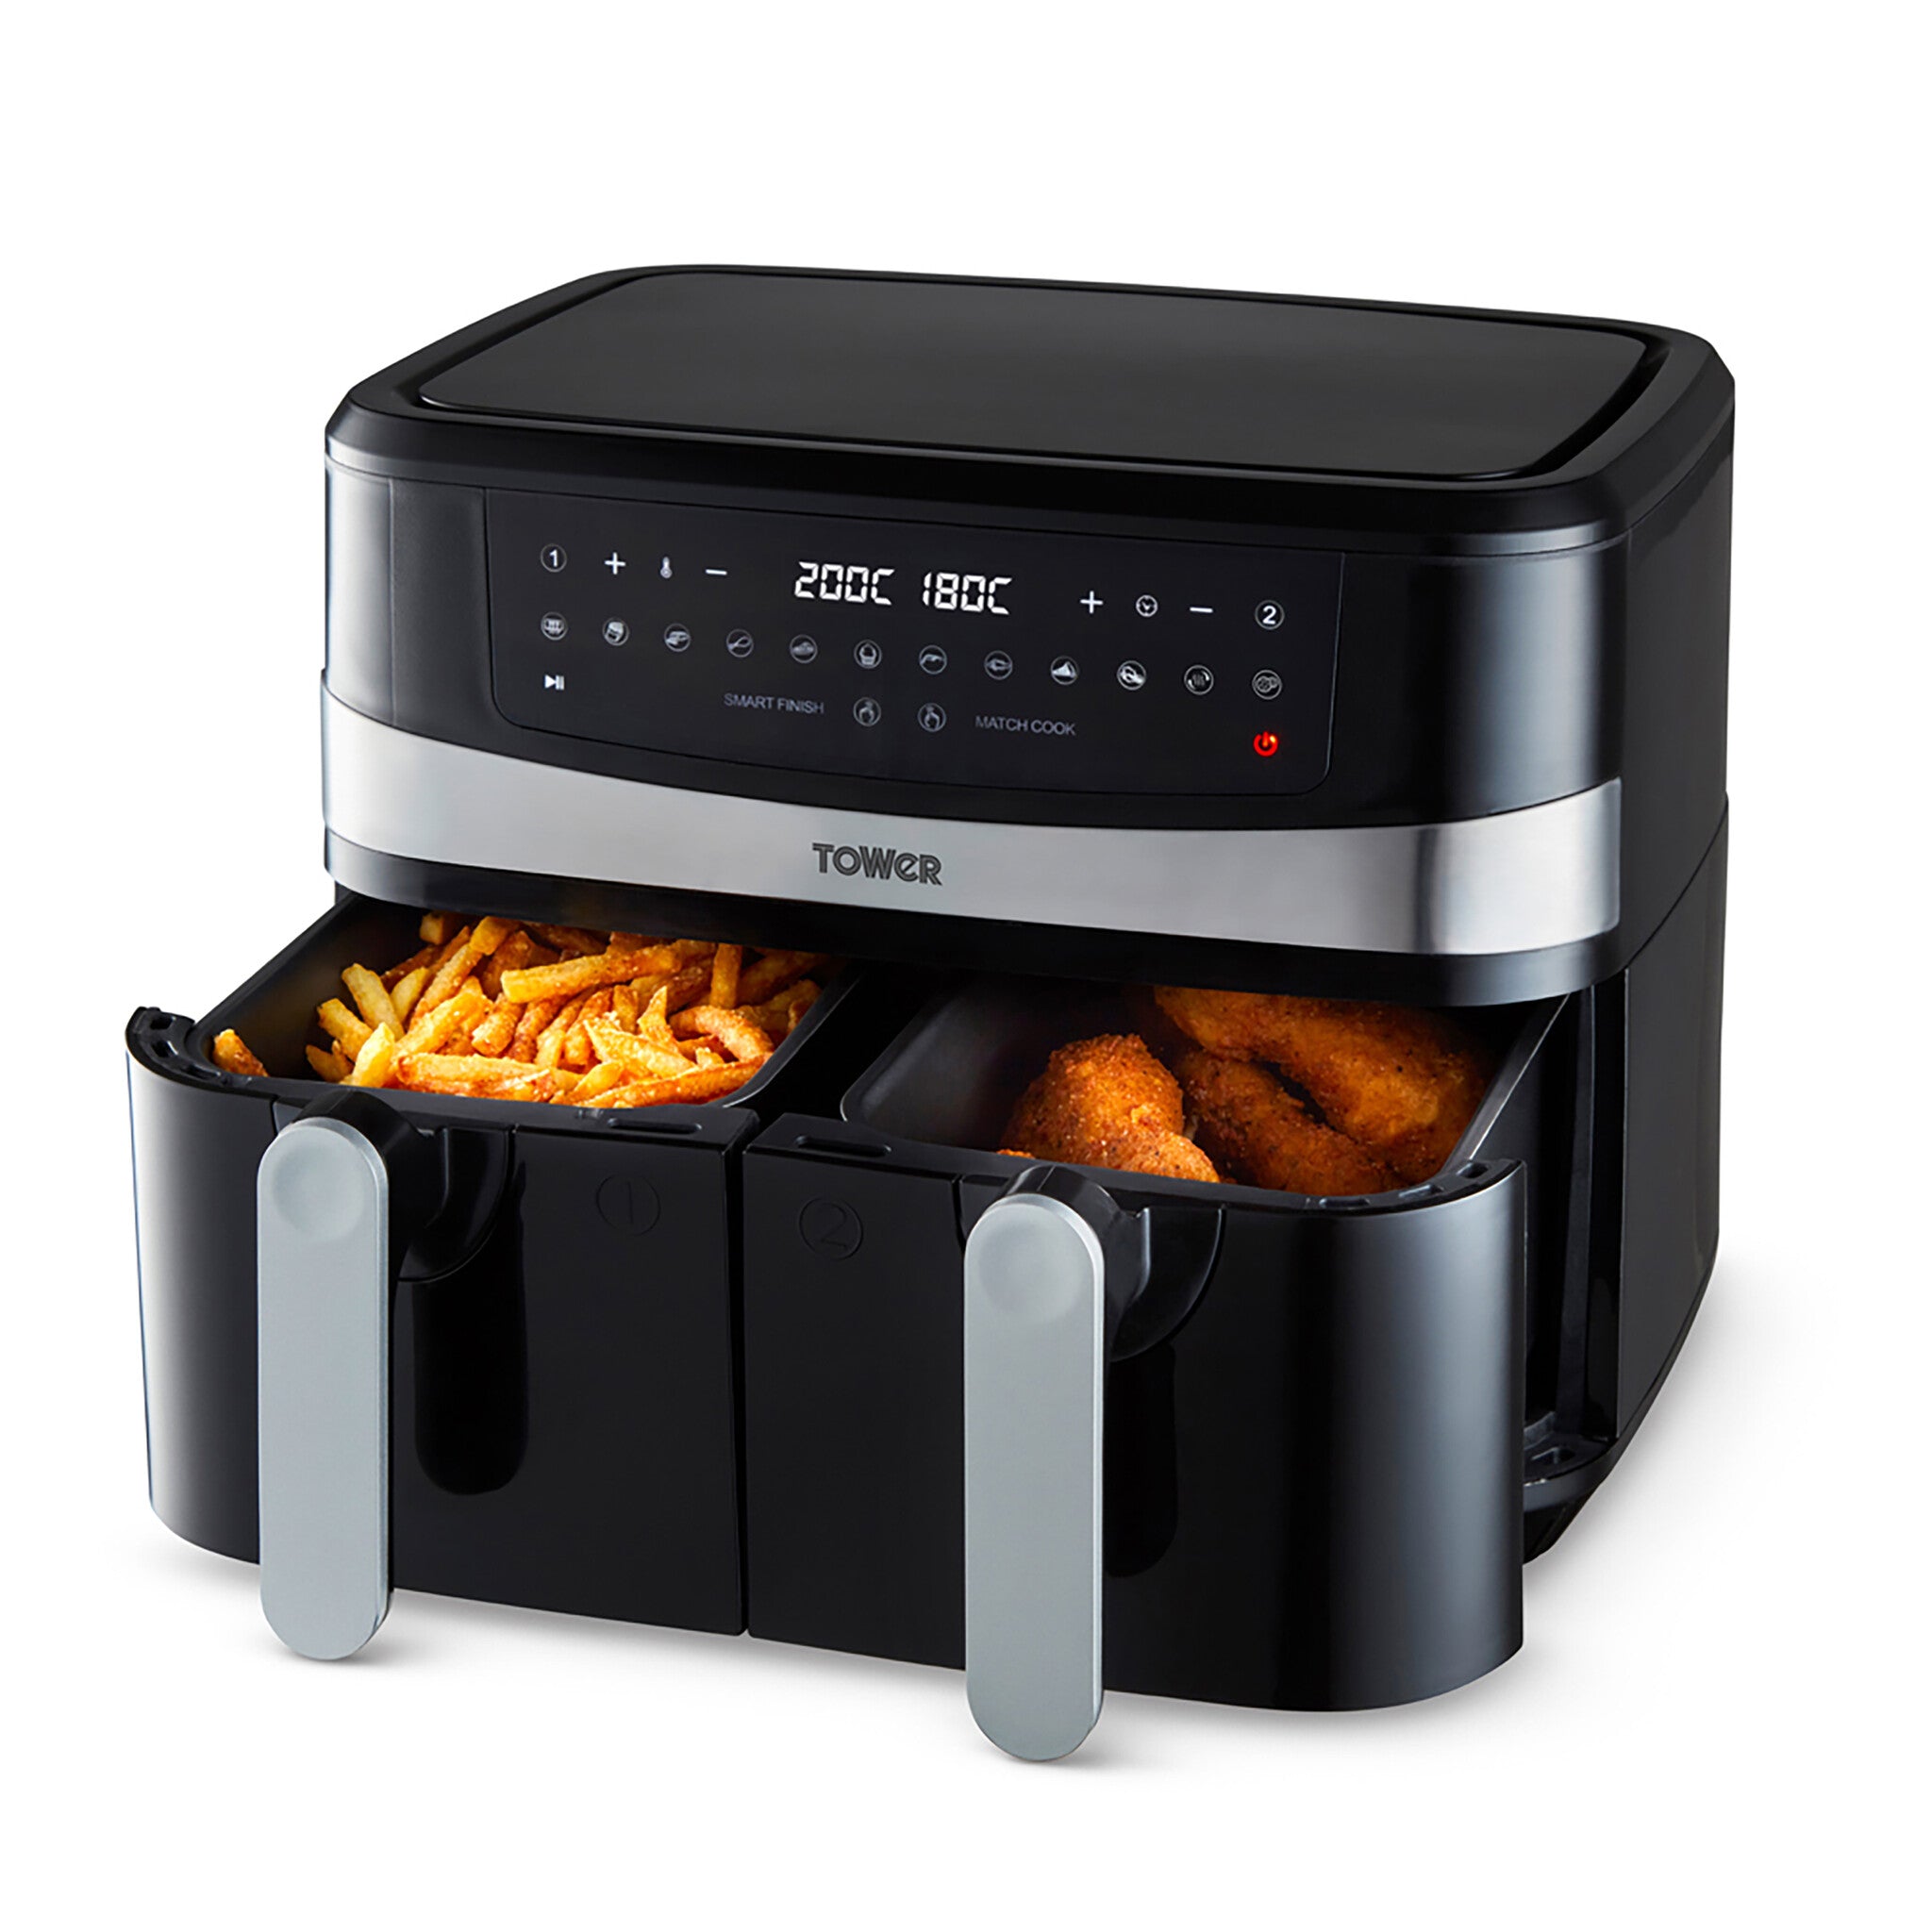 The Nutricook Air Fryer gives you - Hotpoint Appliances